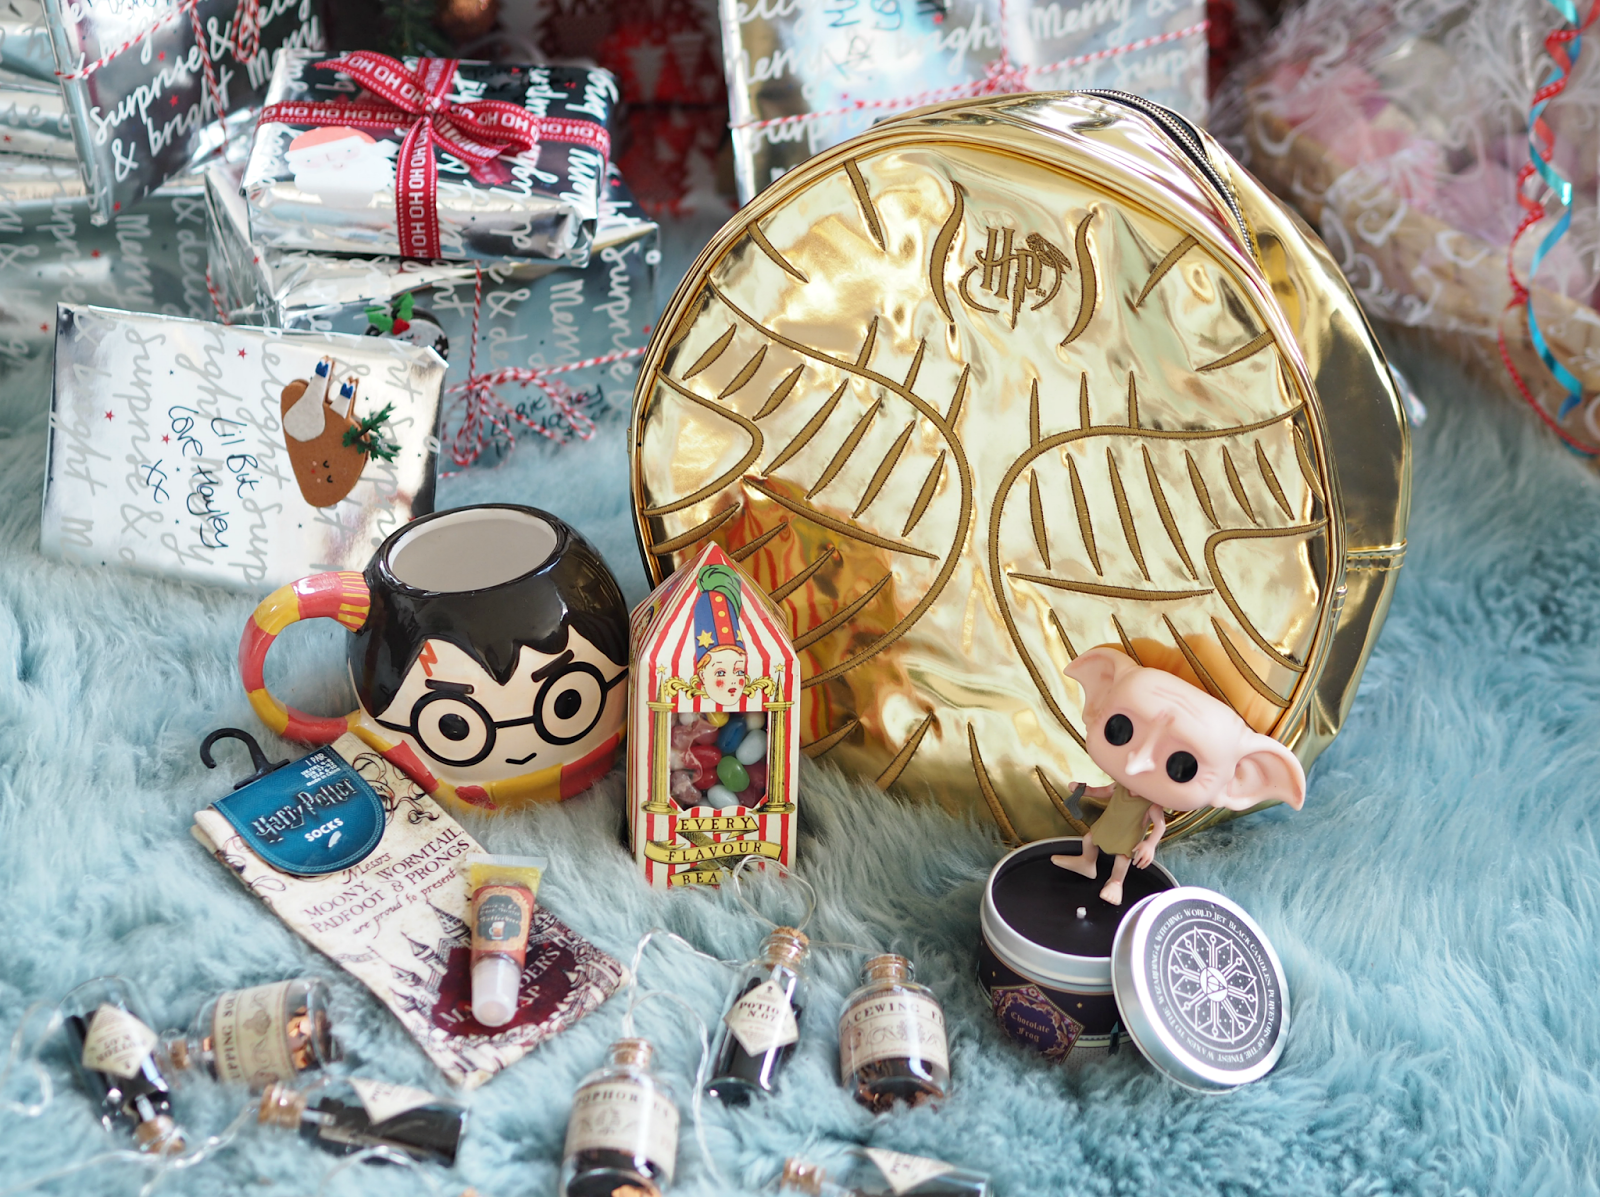 Ten Of The Best Harry Potter Gifts For The Wizard-Loving Muggle In Your Life